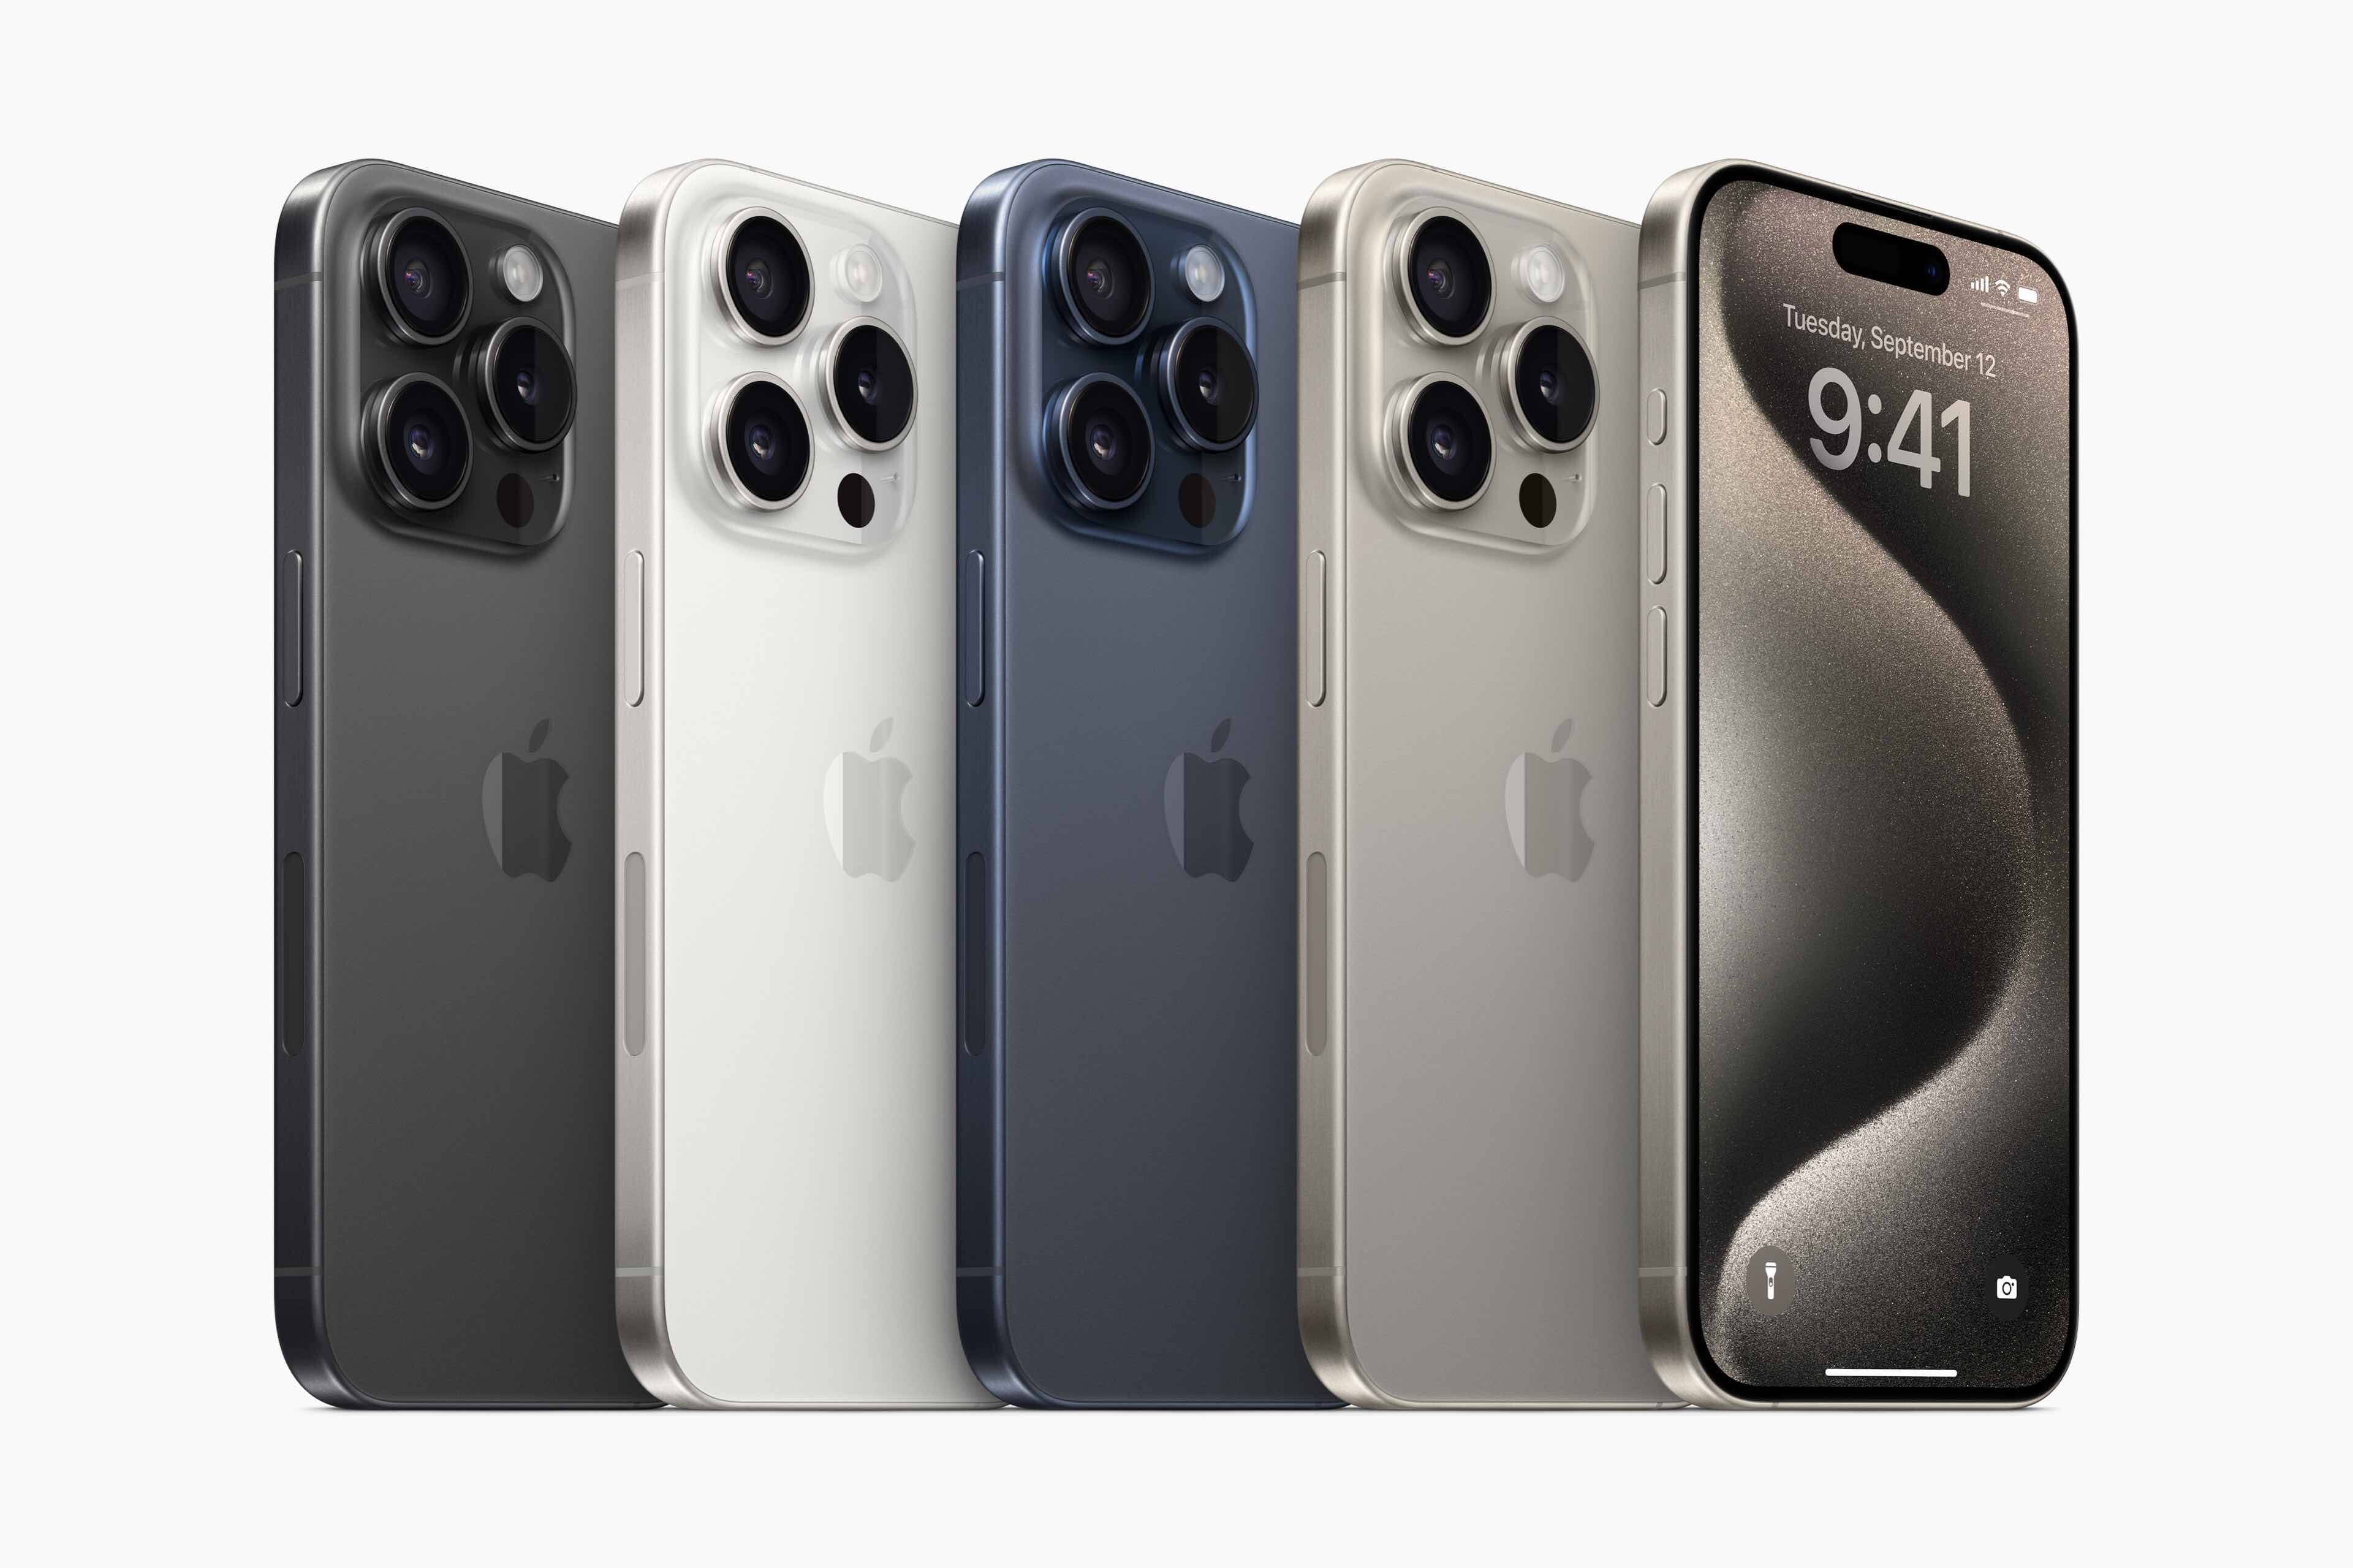 Apple continues to struggle to develop a modem chip for the iPhone to replace those it buys from Qualcomm, and it may not be ready by the time the cur